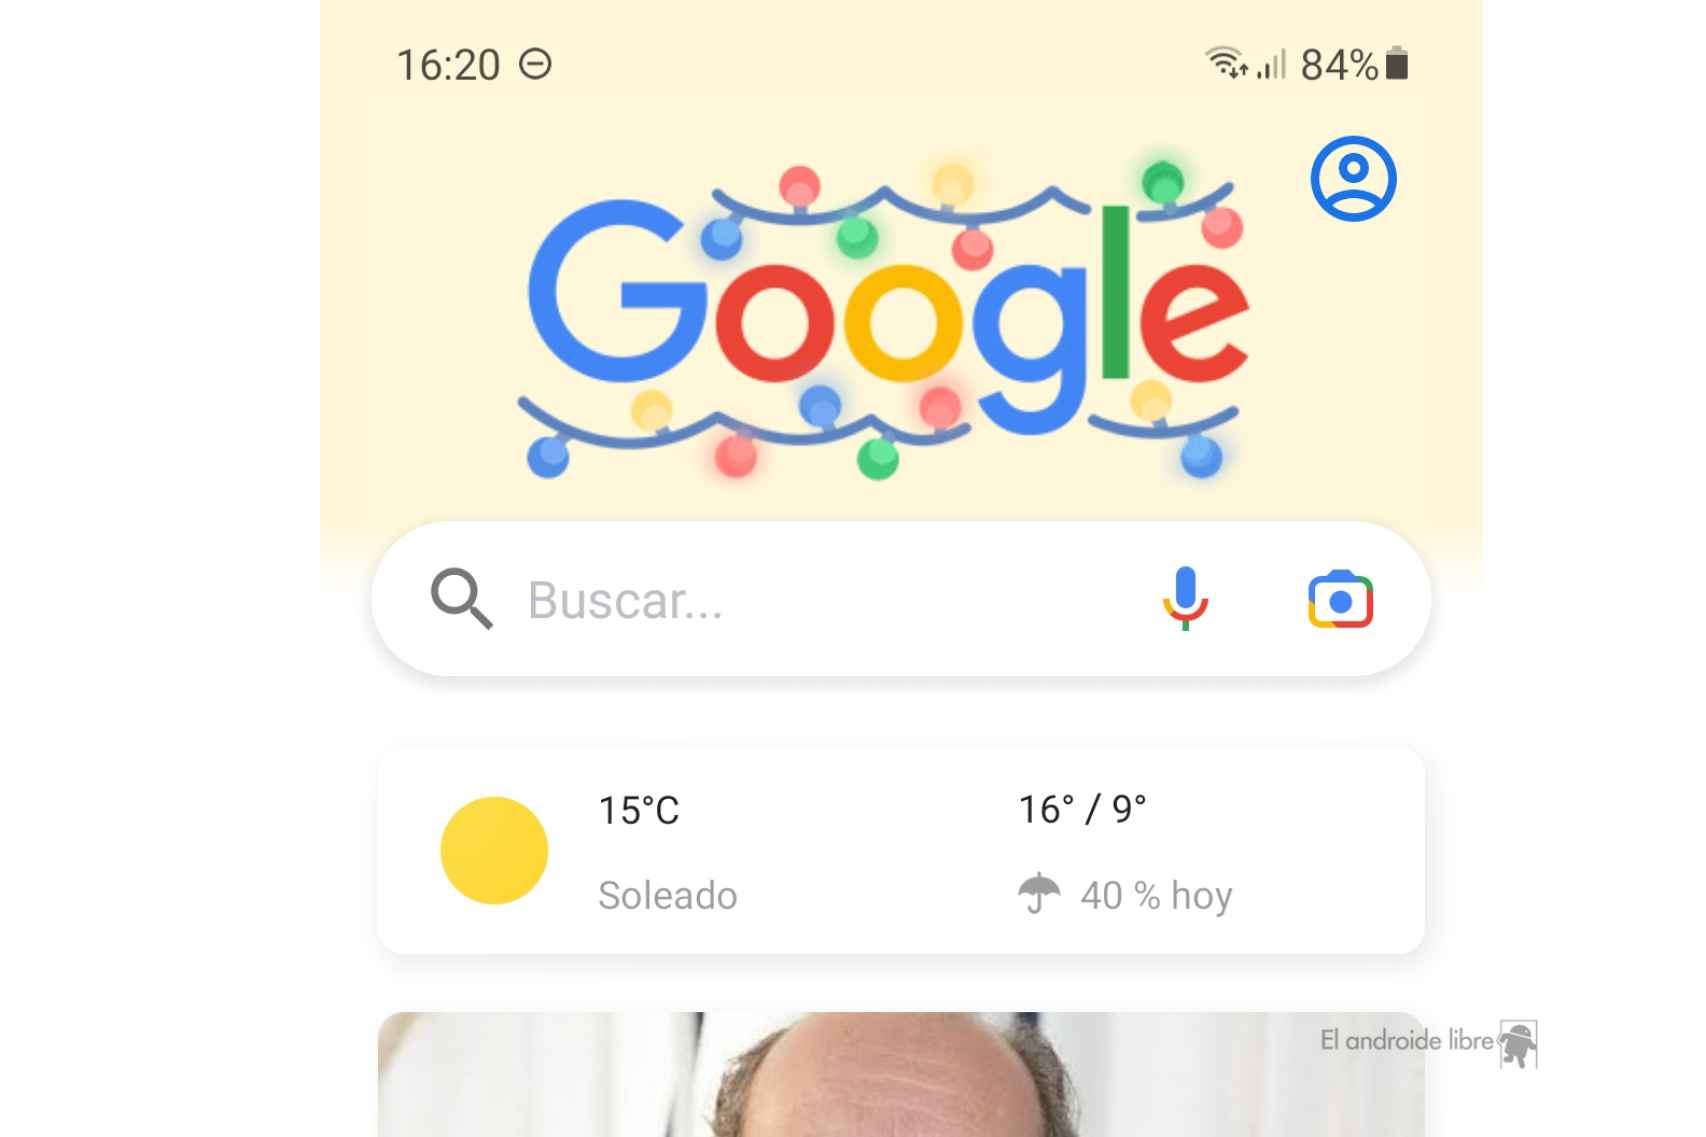 Google Discover search engine today